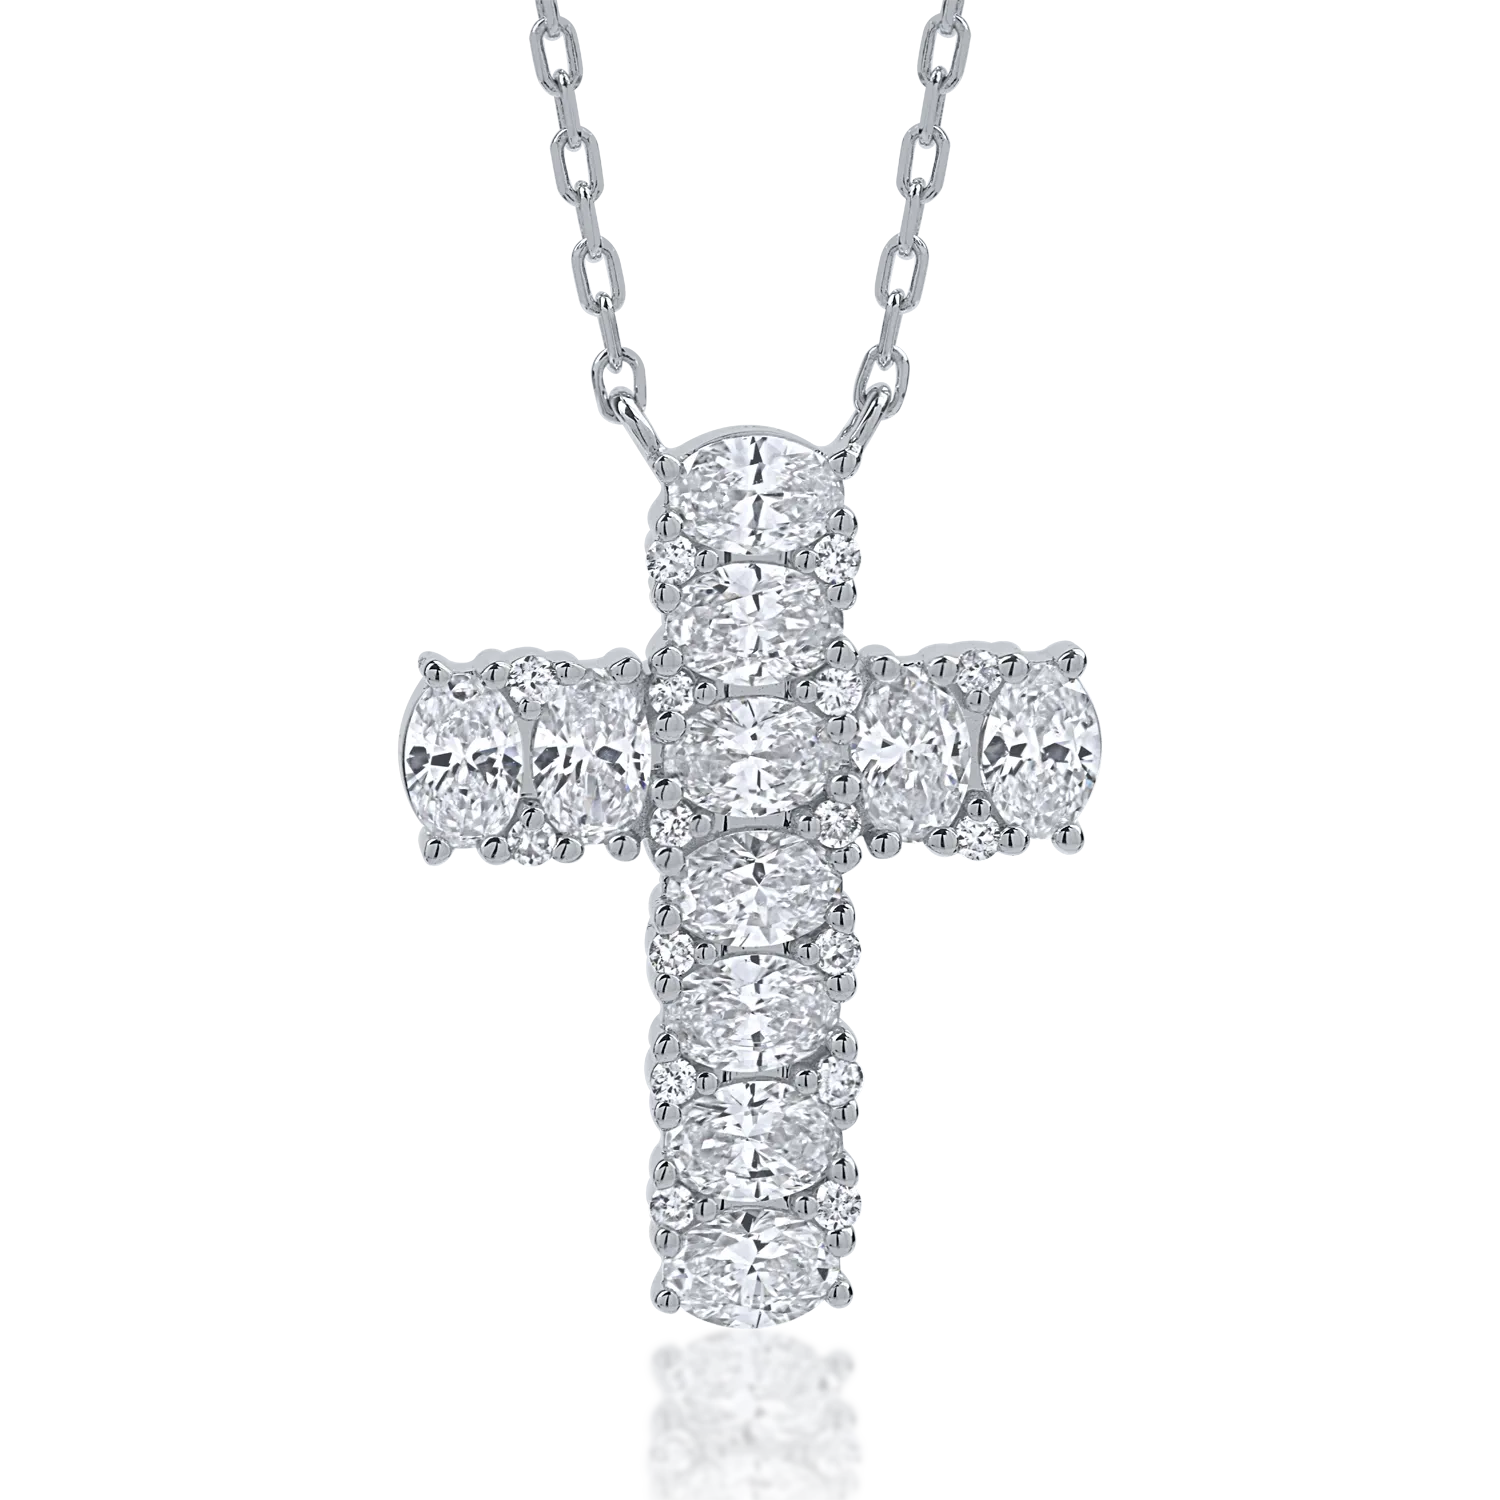 White gold cross pendant necklace with 1.2ct diamonds